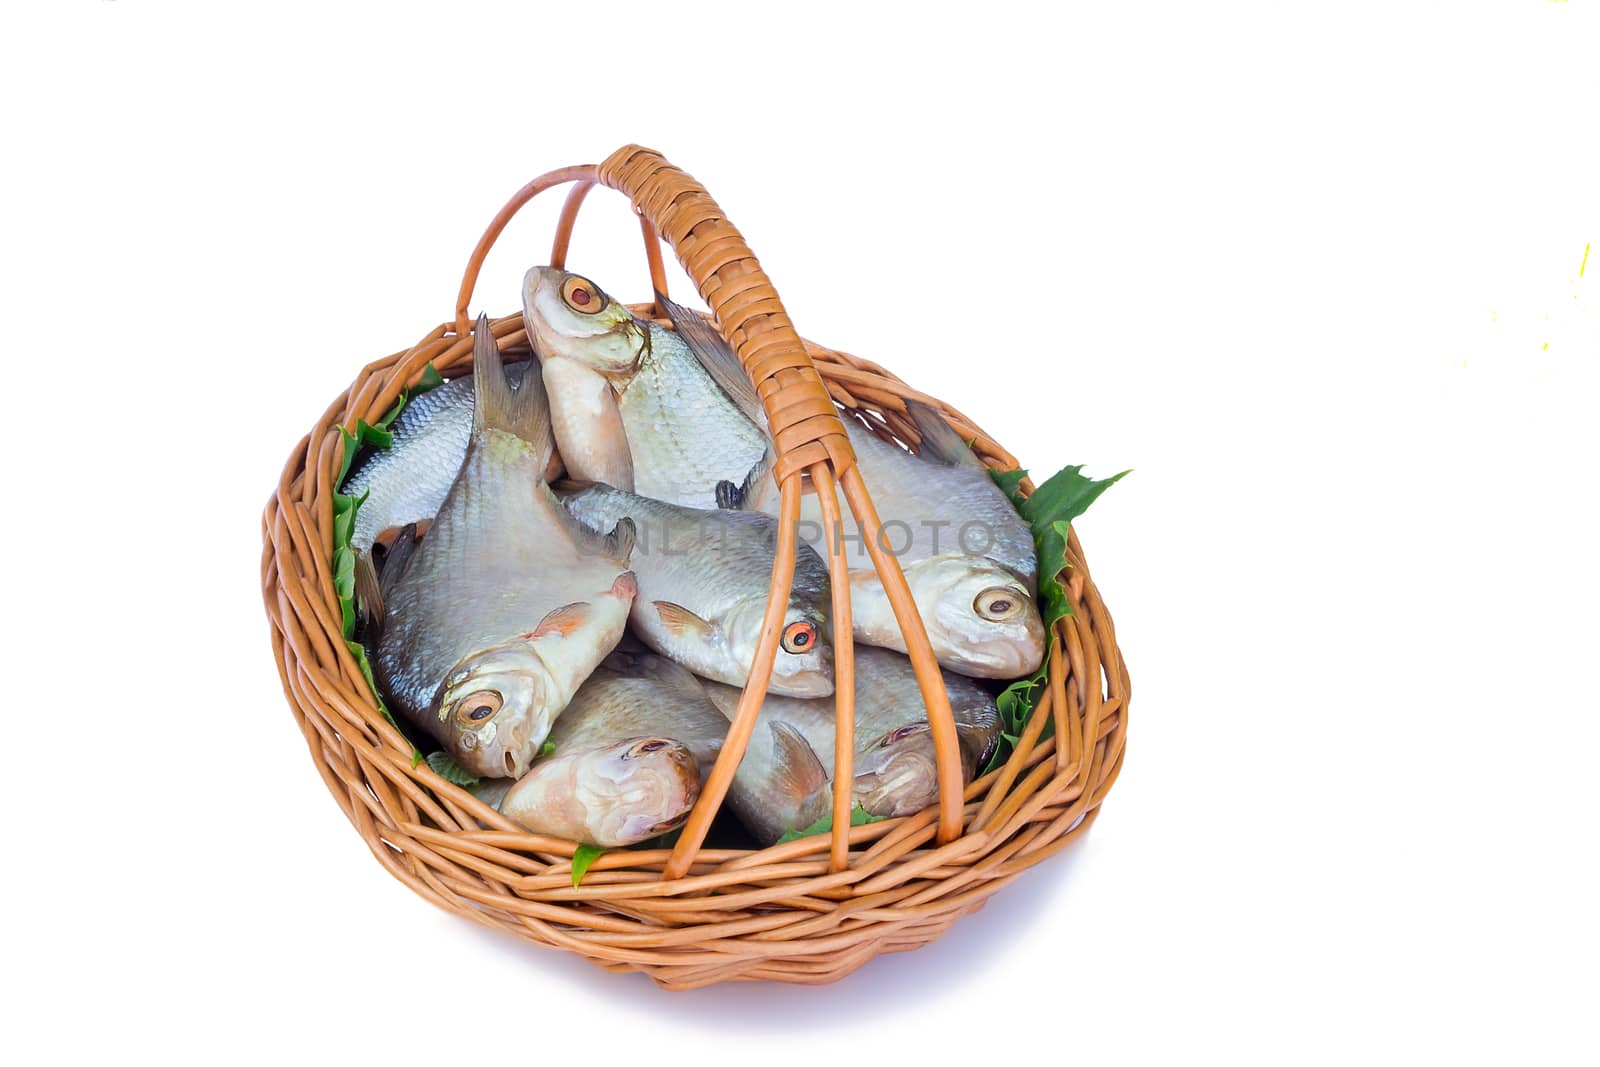 Wattled basket with hooked fish on a white background. by georgina198